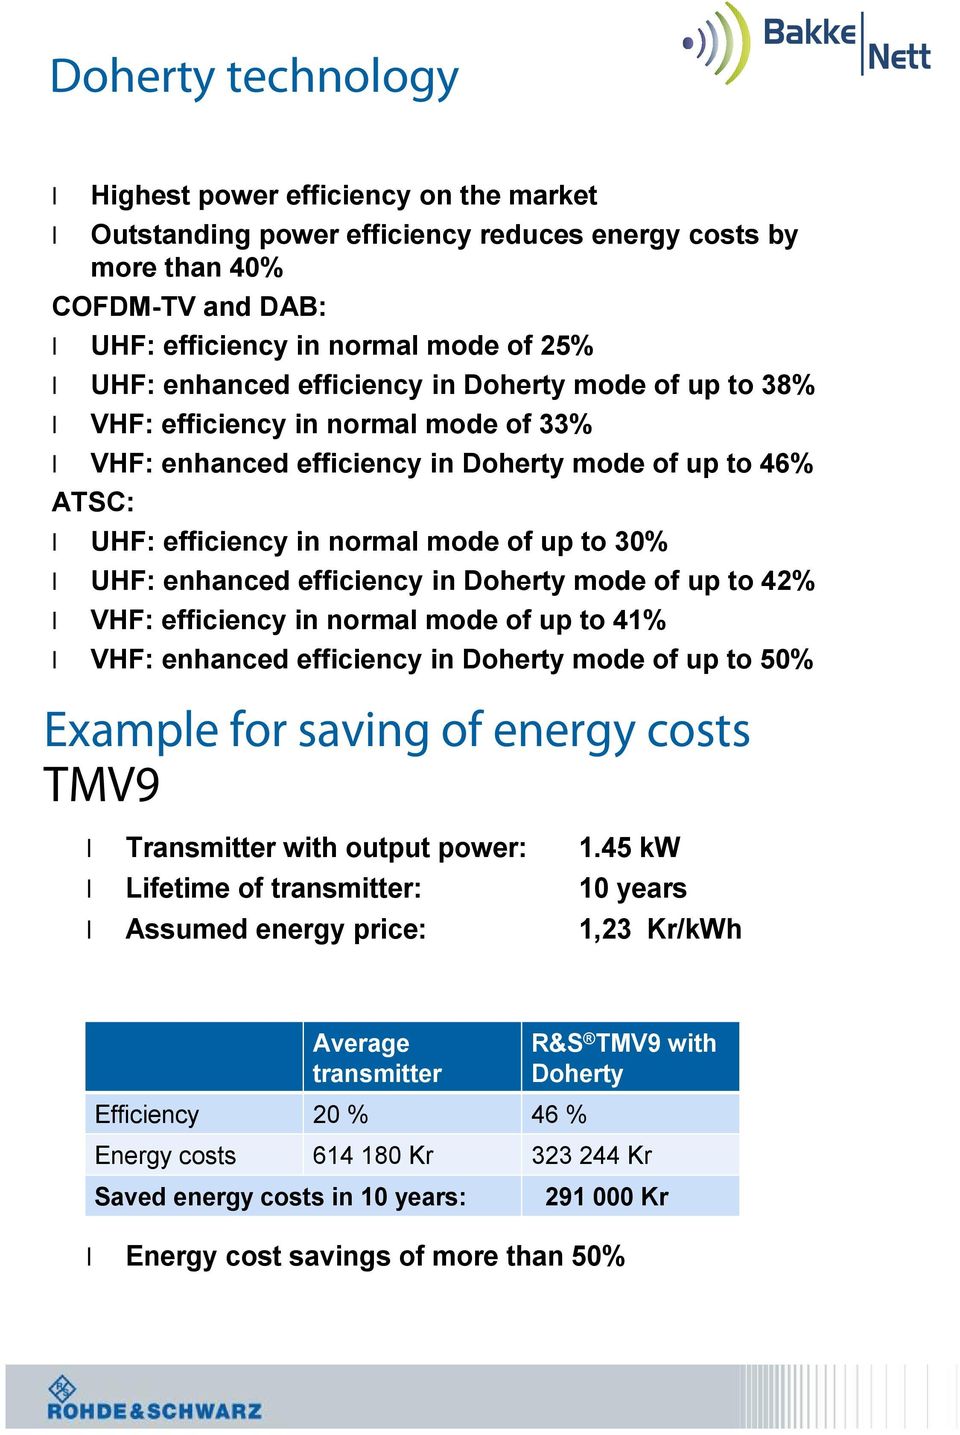 efficiency in Doherty mode of up to 42% VHF: efficiency in norma mode of up to 41% VHF: enhanced efficiency in Doherty mode of up to 50% Exampe for saving of energy costs TMV9 Transmitter with output